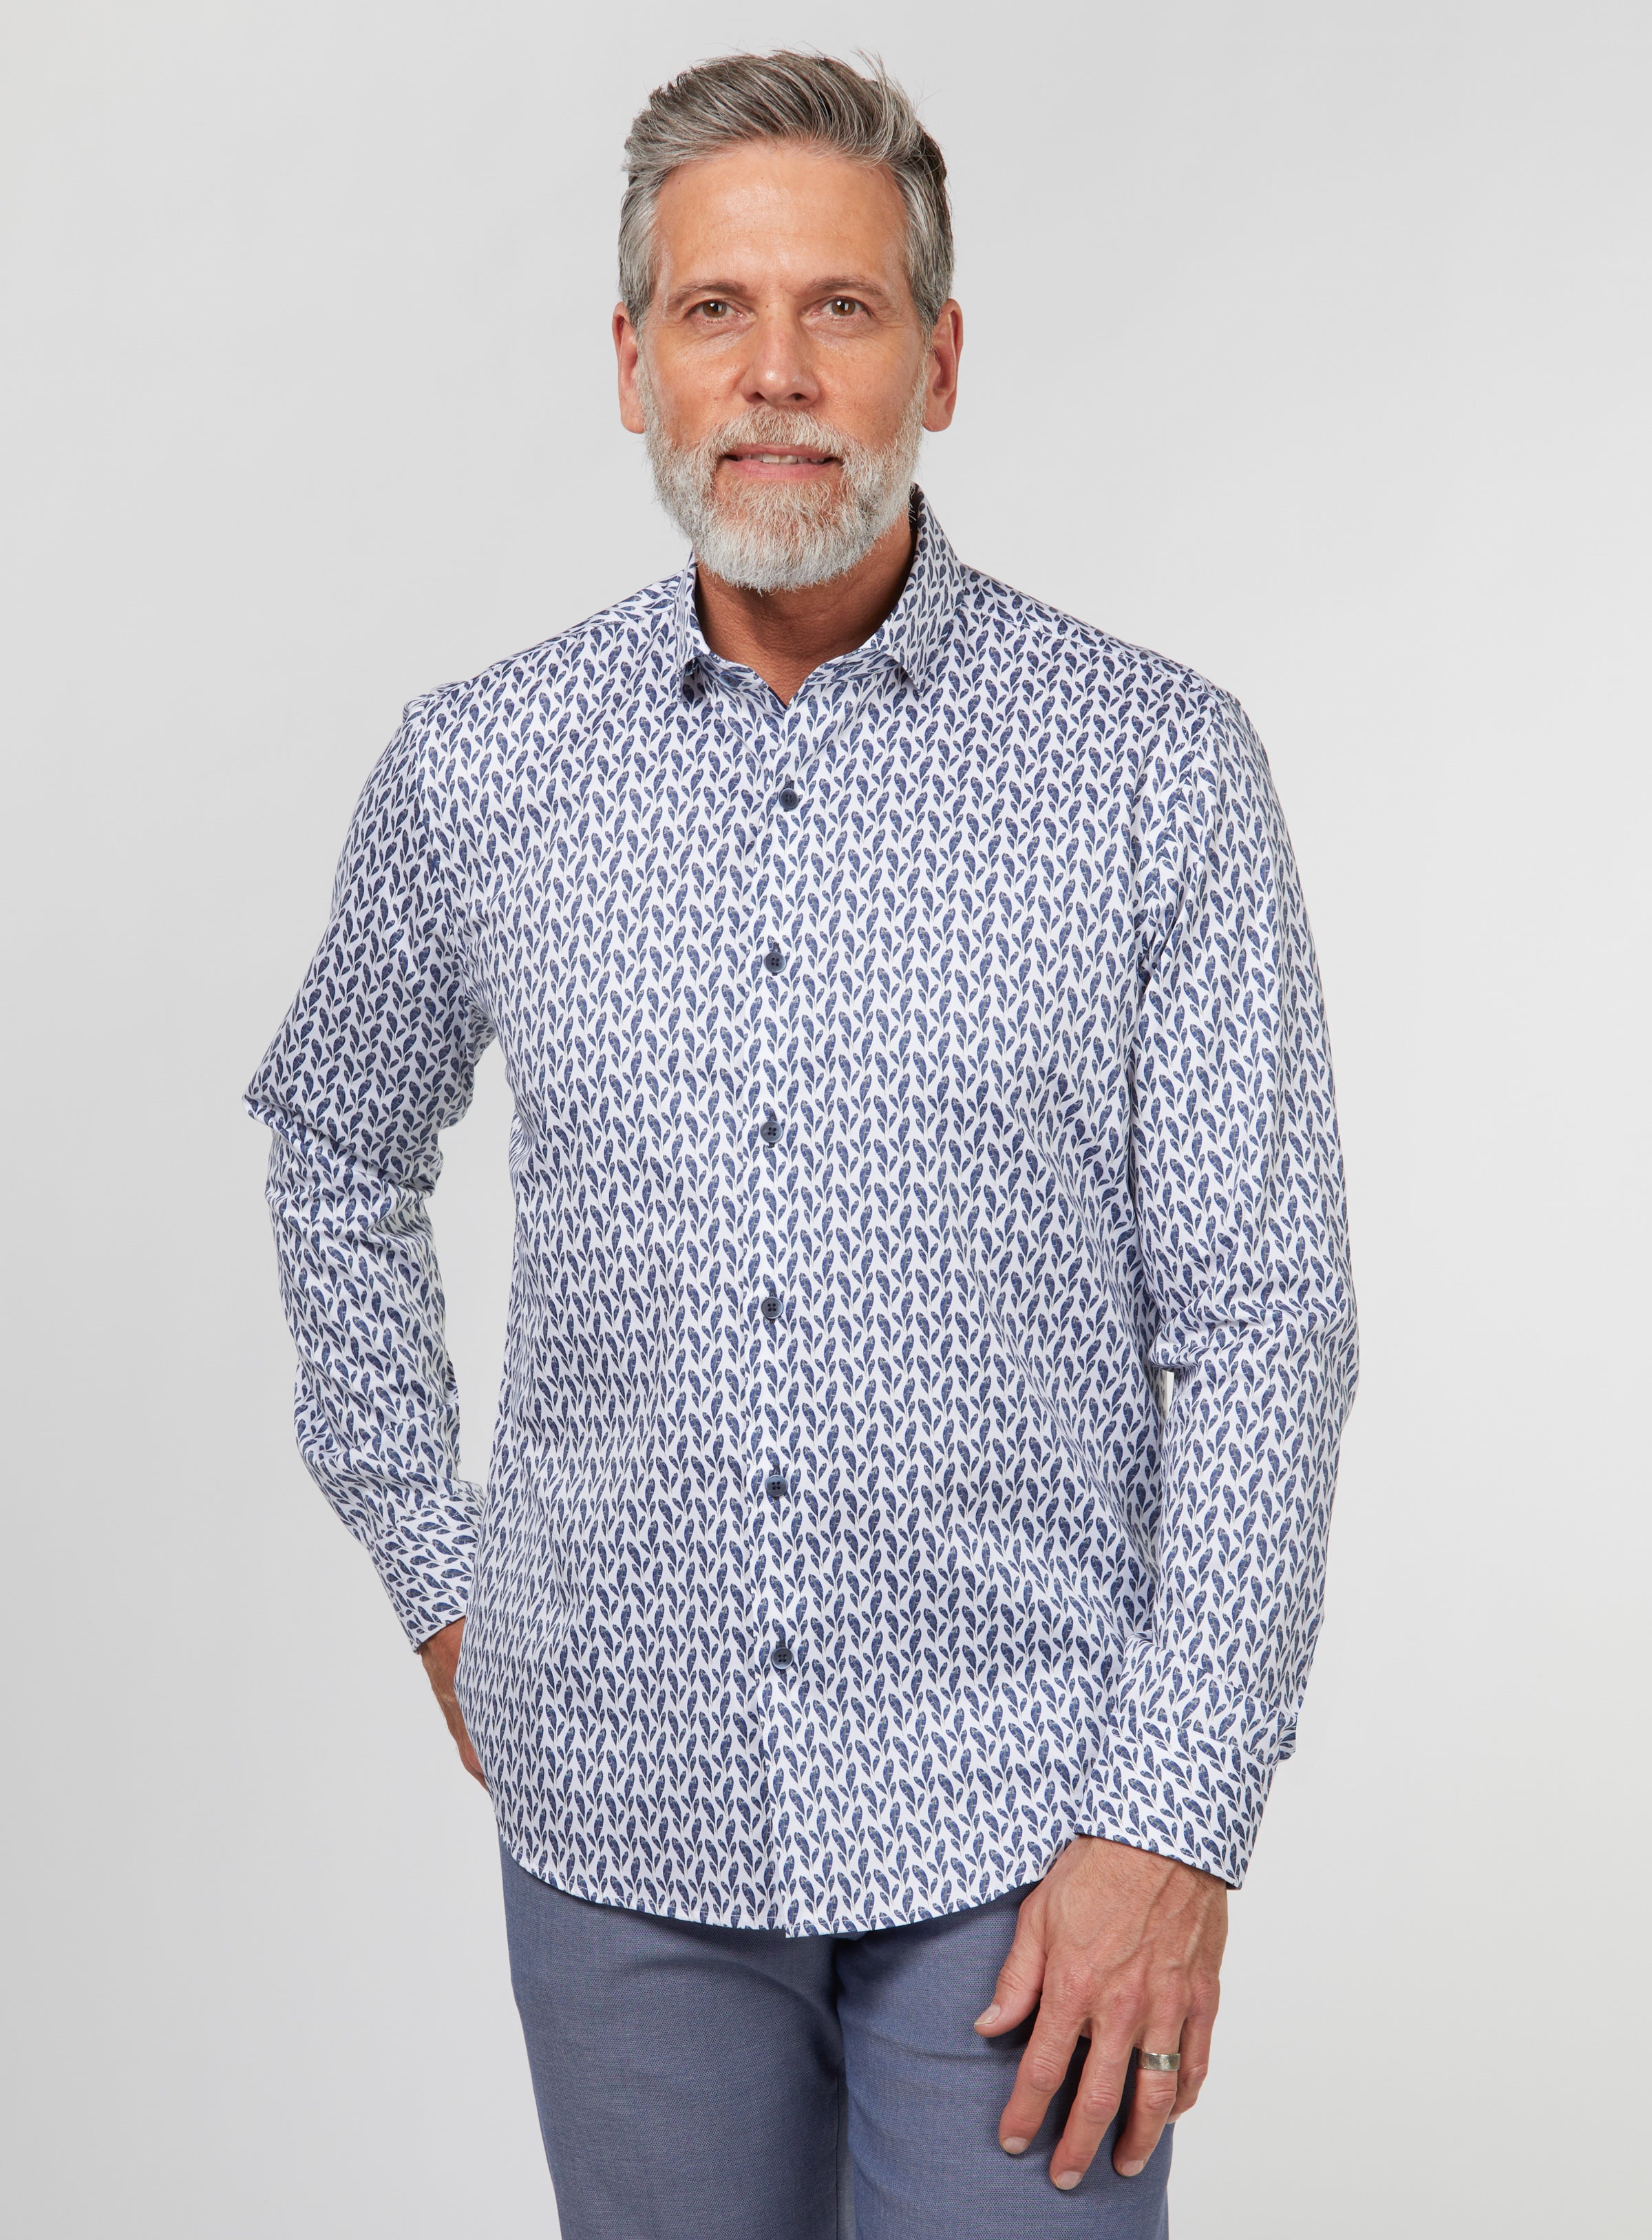 Men's Casual Shirts and Overshirts - Ernest